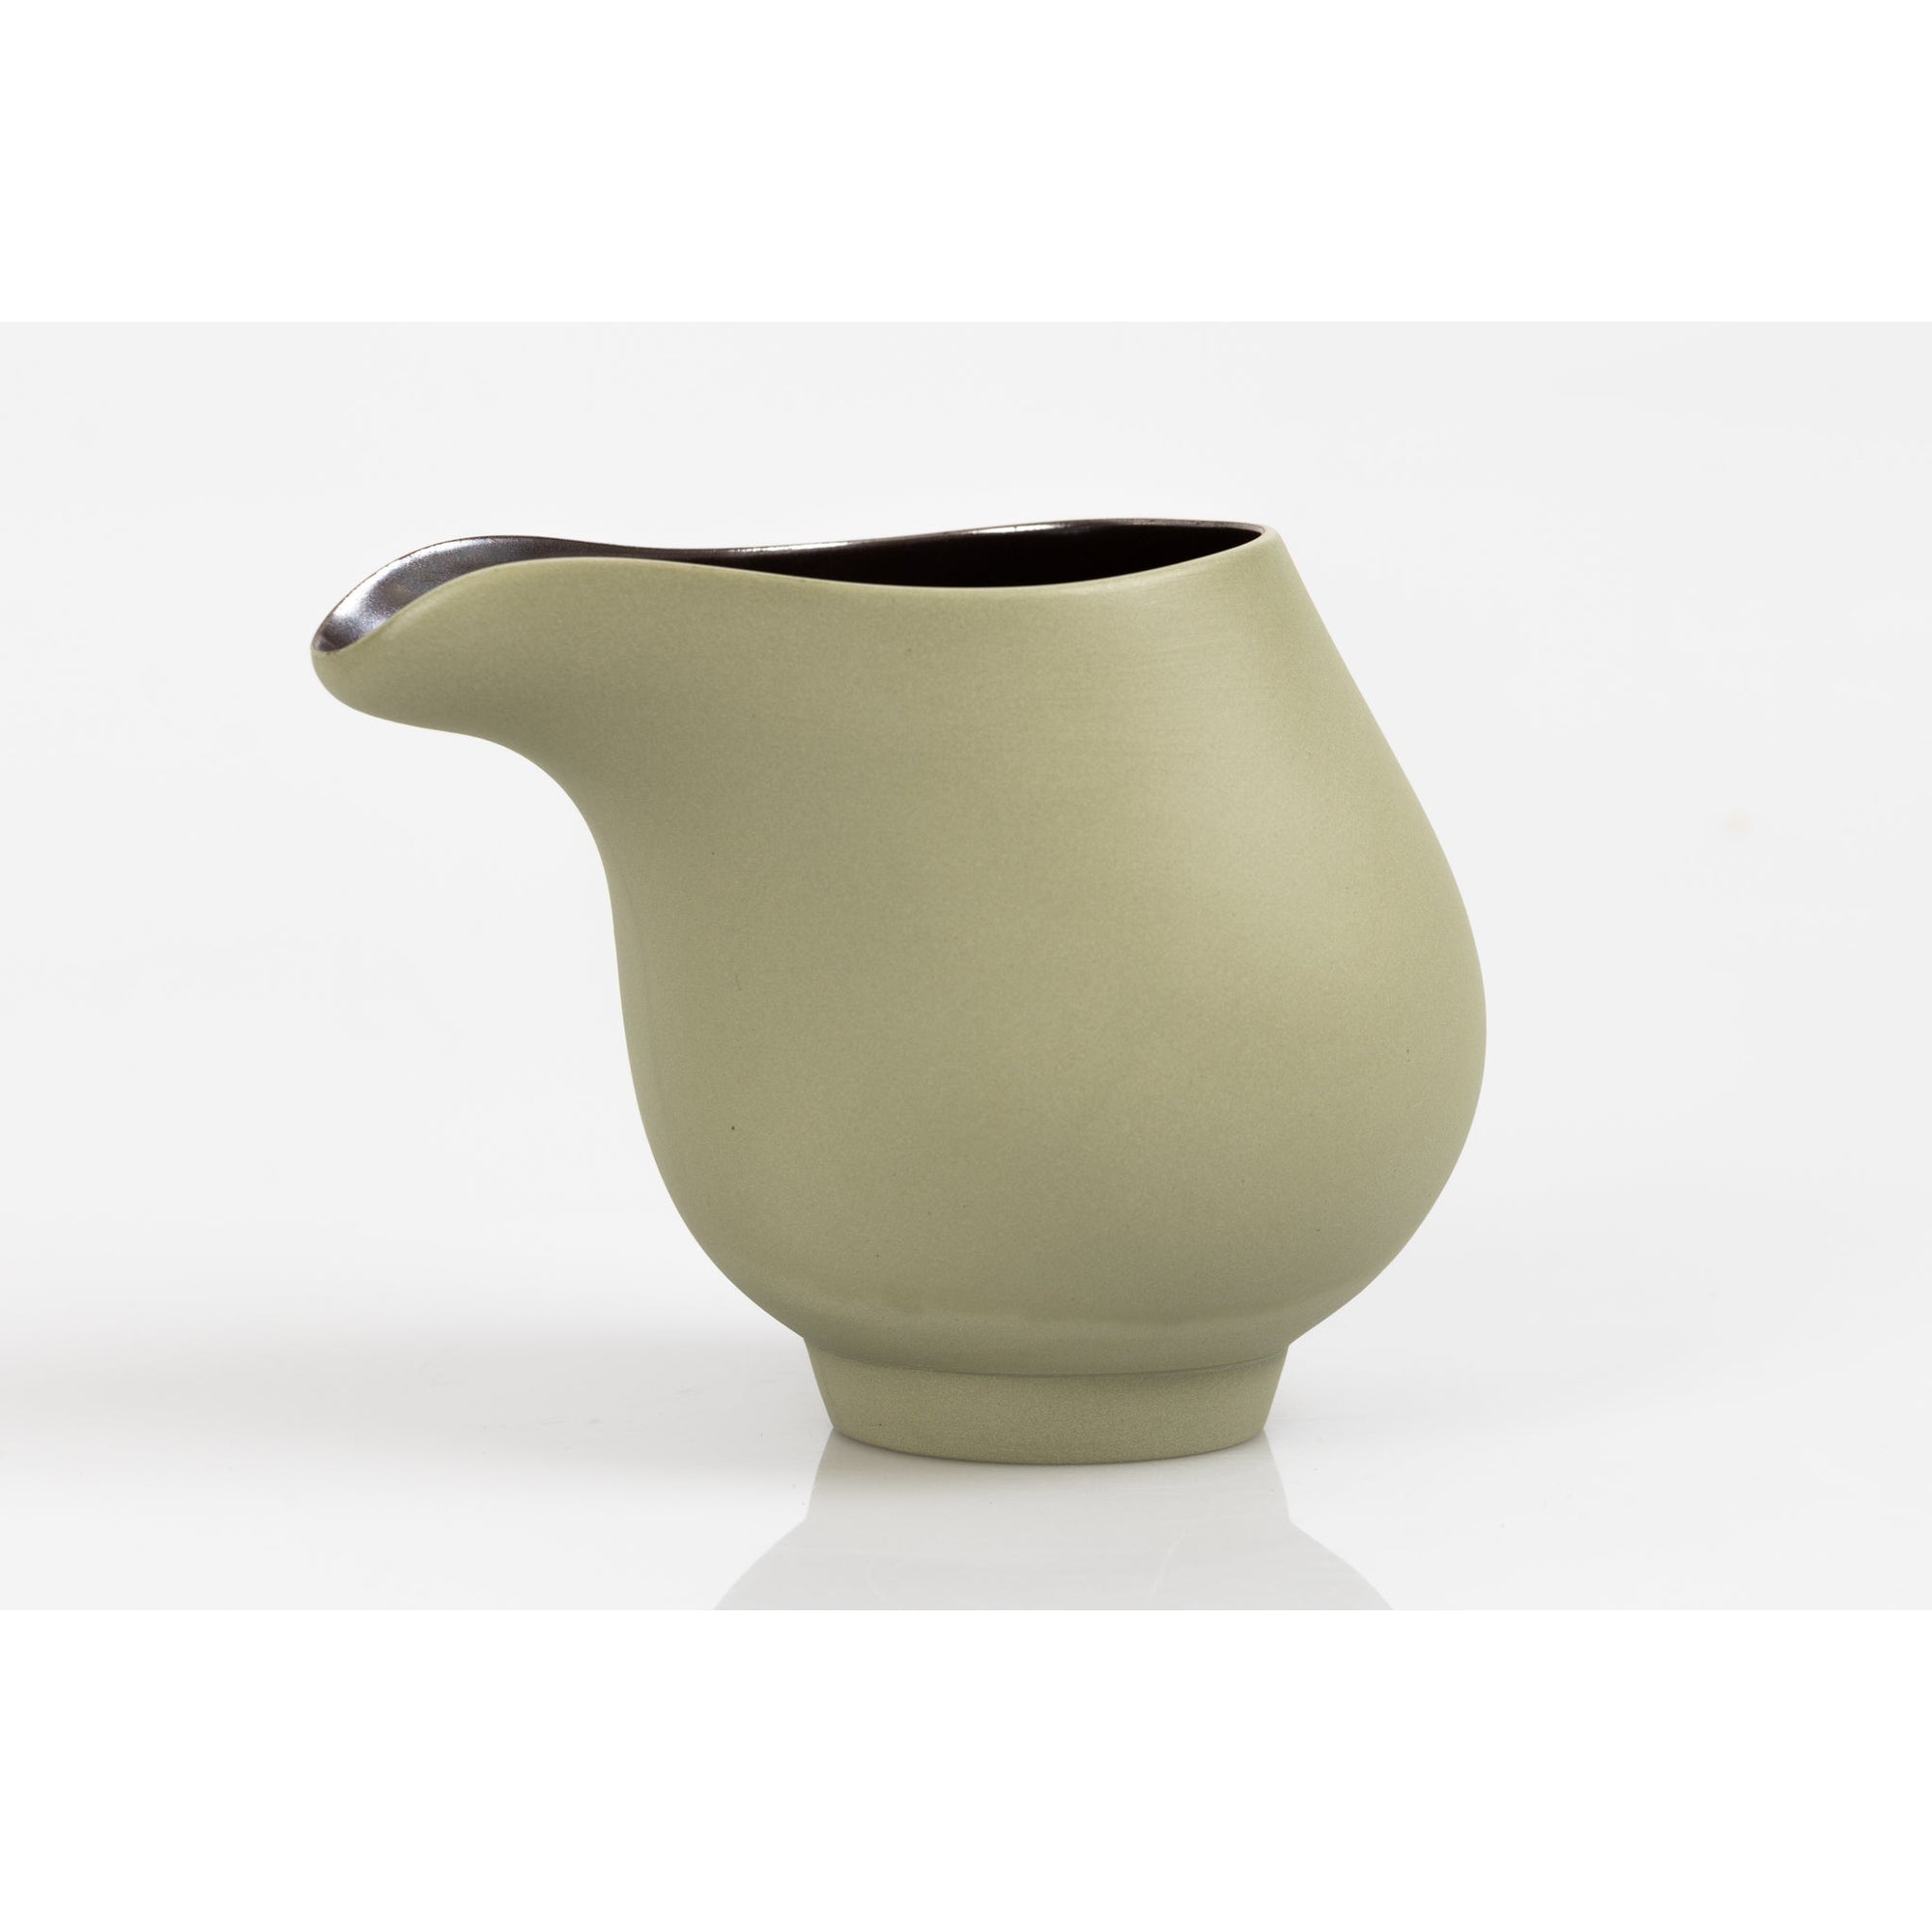 KSB2 Flow, Olive Stoneware Jug by Kate Schuricht, available at Padstow Gallery, Cornwall